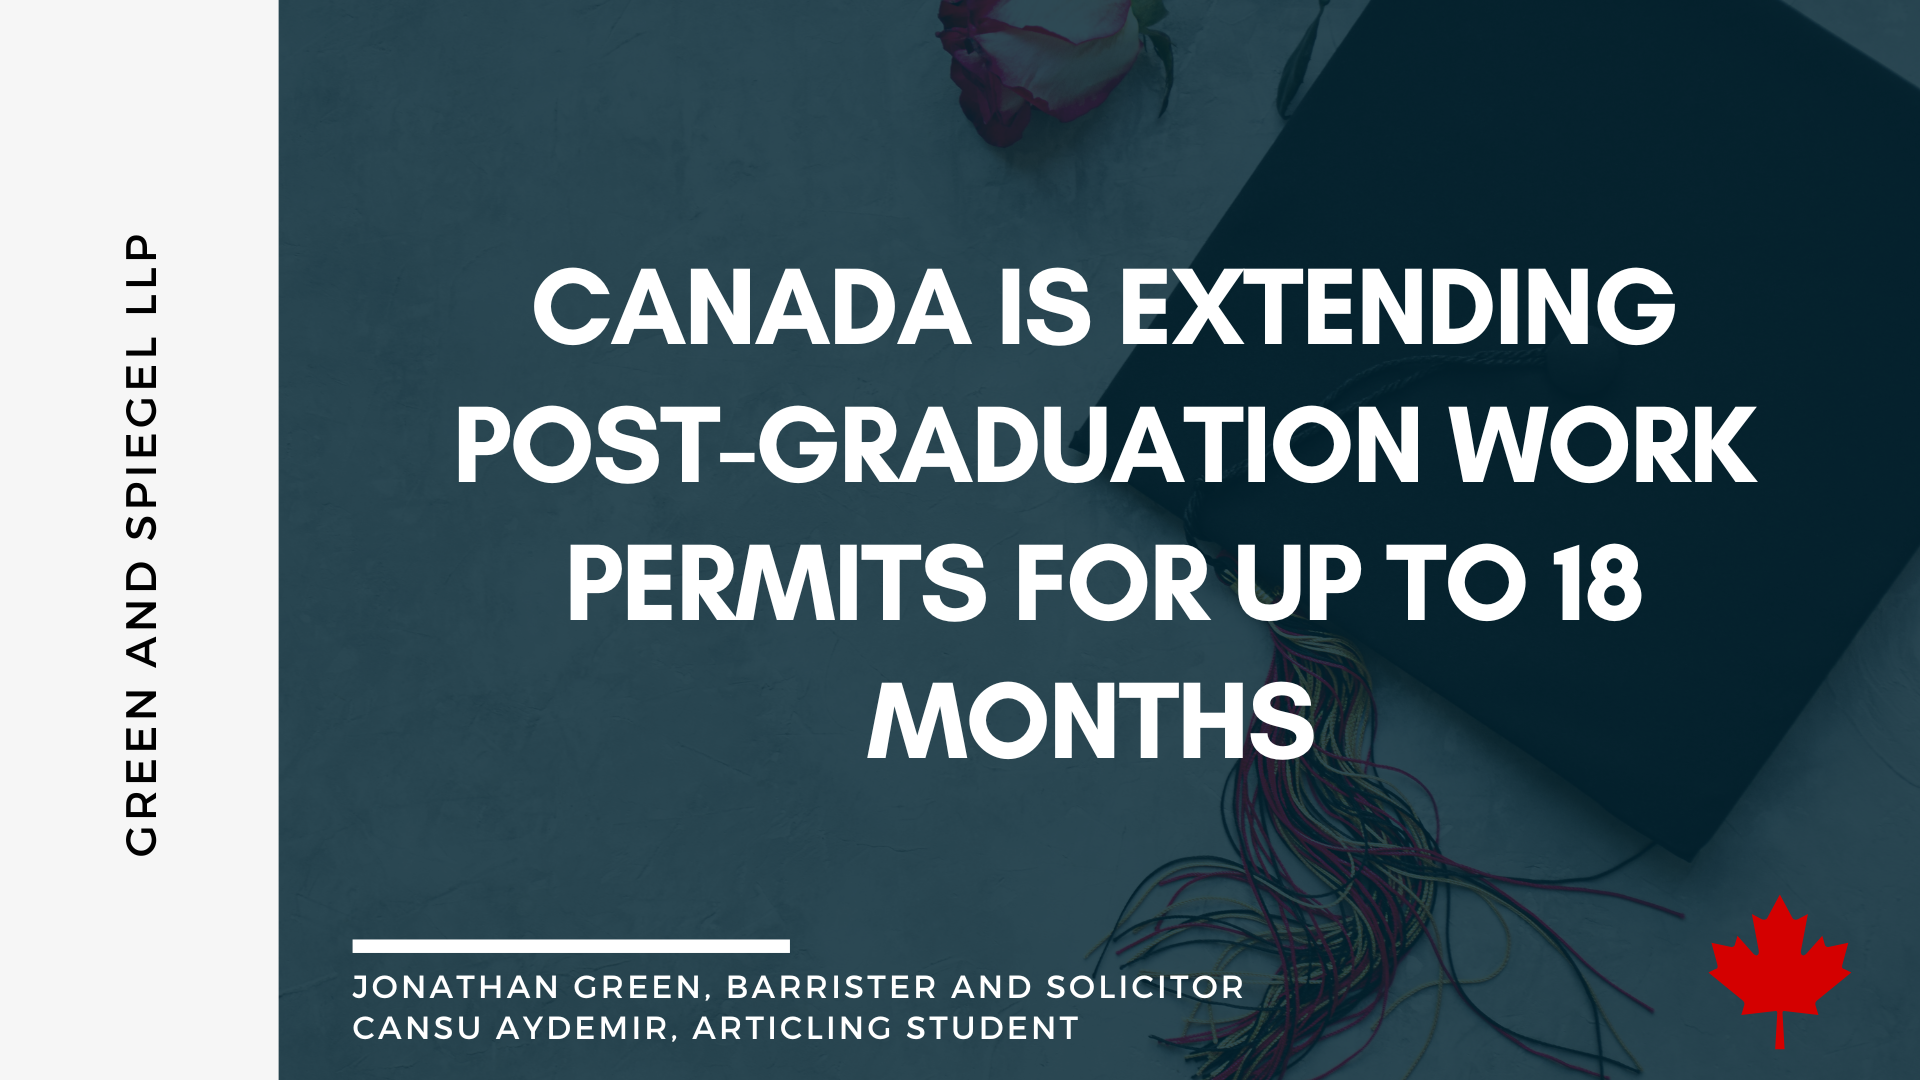 CANADA IS EXTENDING POST-GRADUATION WORK PERMITS FOR UP TO 18 MONTHS